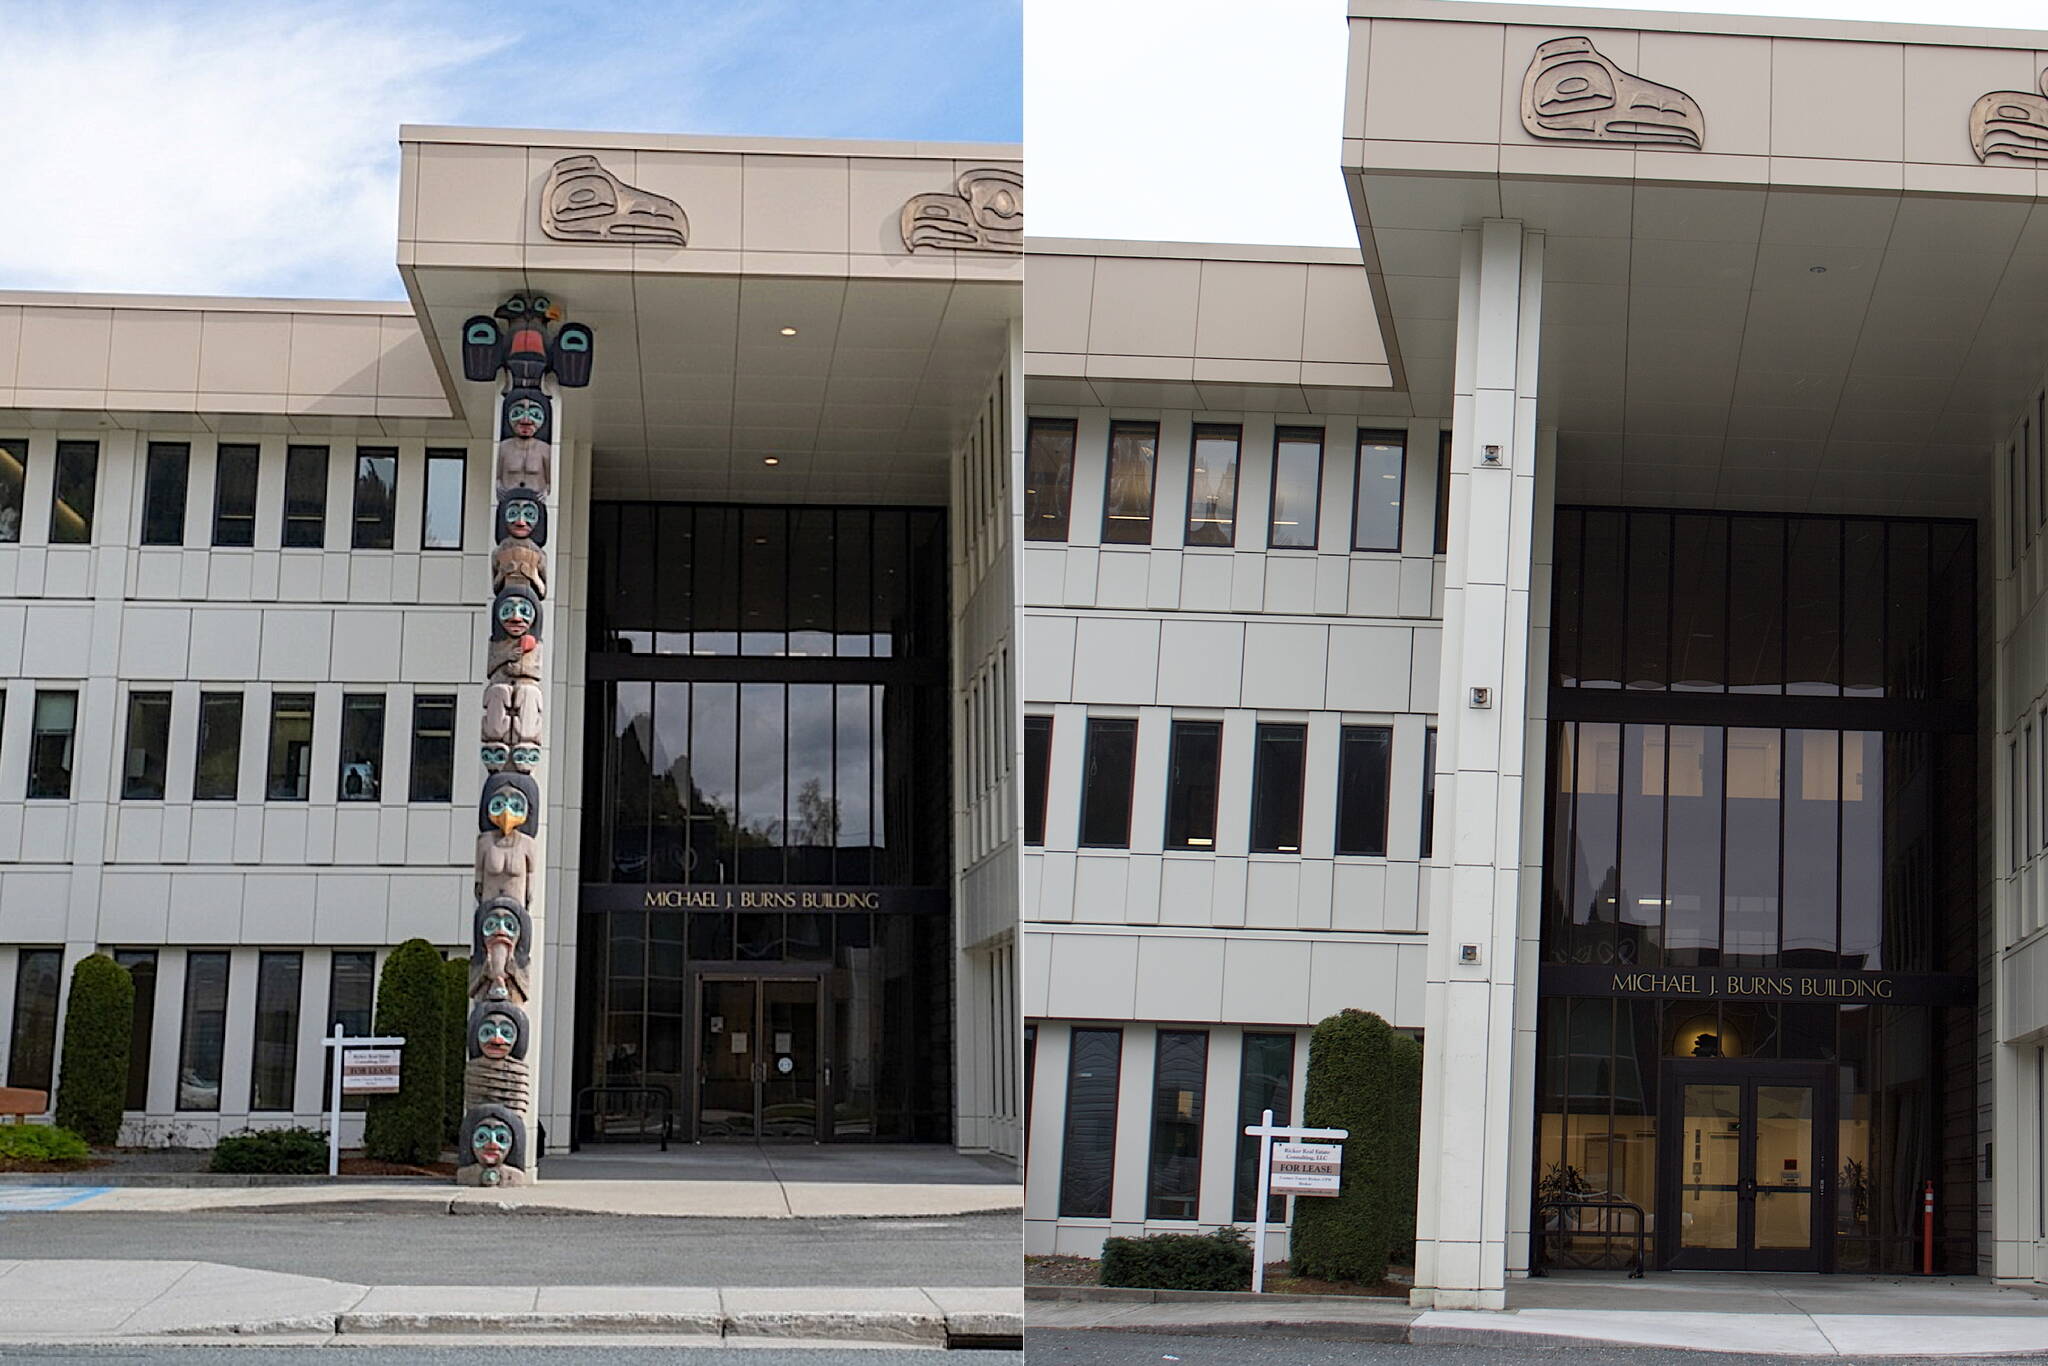 A 30-foot-tall totem pole, seen in the photo at left, was removed from Michael J. Burns Building on Friday, as seen in the photo at right taken Sunday. The totem pole, plus two others already removed from the interior of the building that houses the Alaska Permanent Fund Corp., are scheduled to be placed at Goldbelt Inc.’s headquarters for its 50th anniversary celebration. (Left photo courtesy of the Alaska Permanent Fund Corp.; right photo by Mark Sabbatini / Juneau Empire)